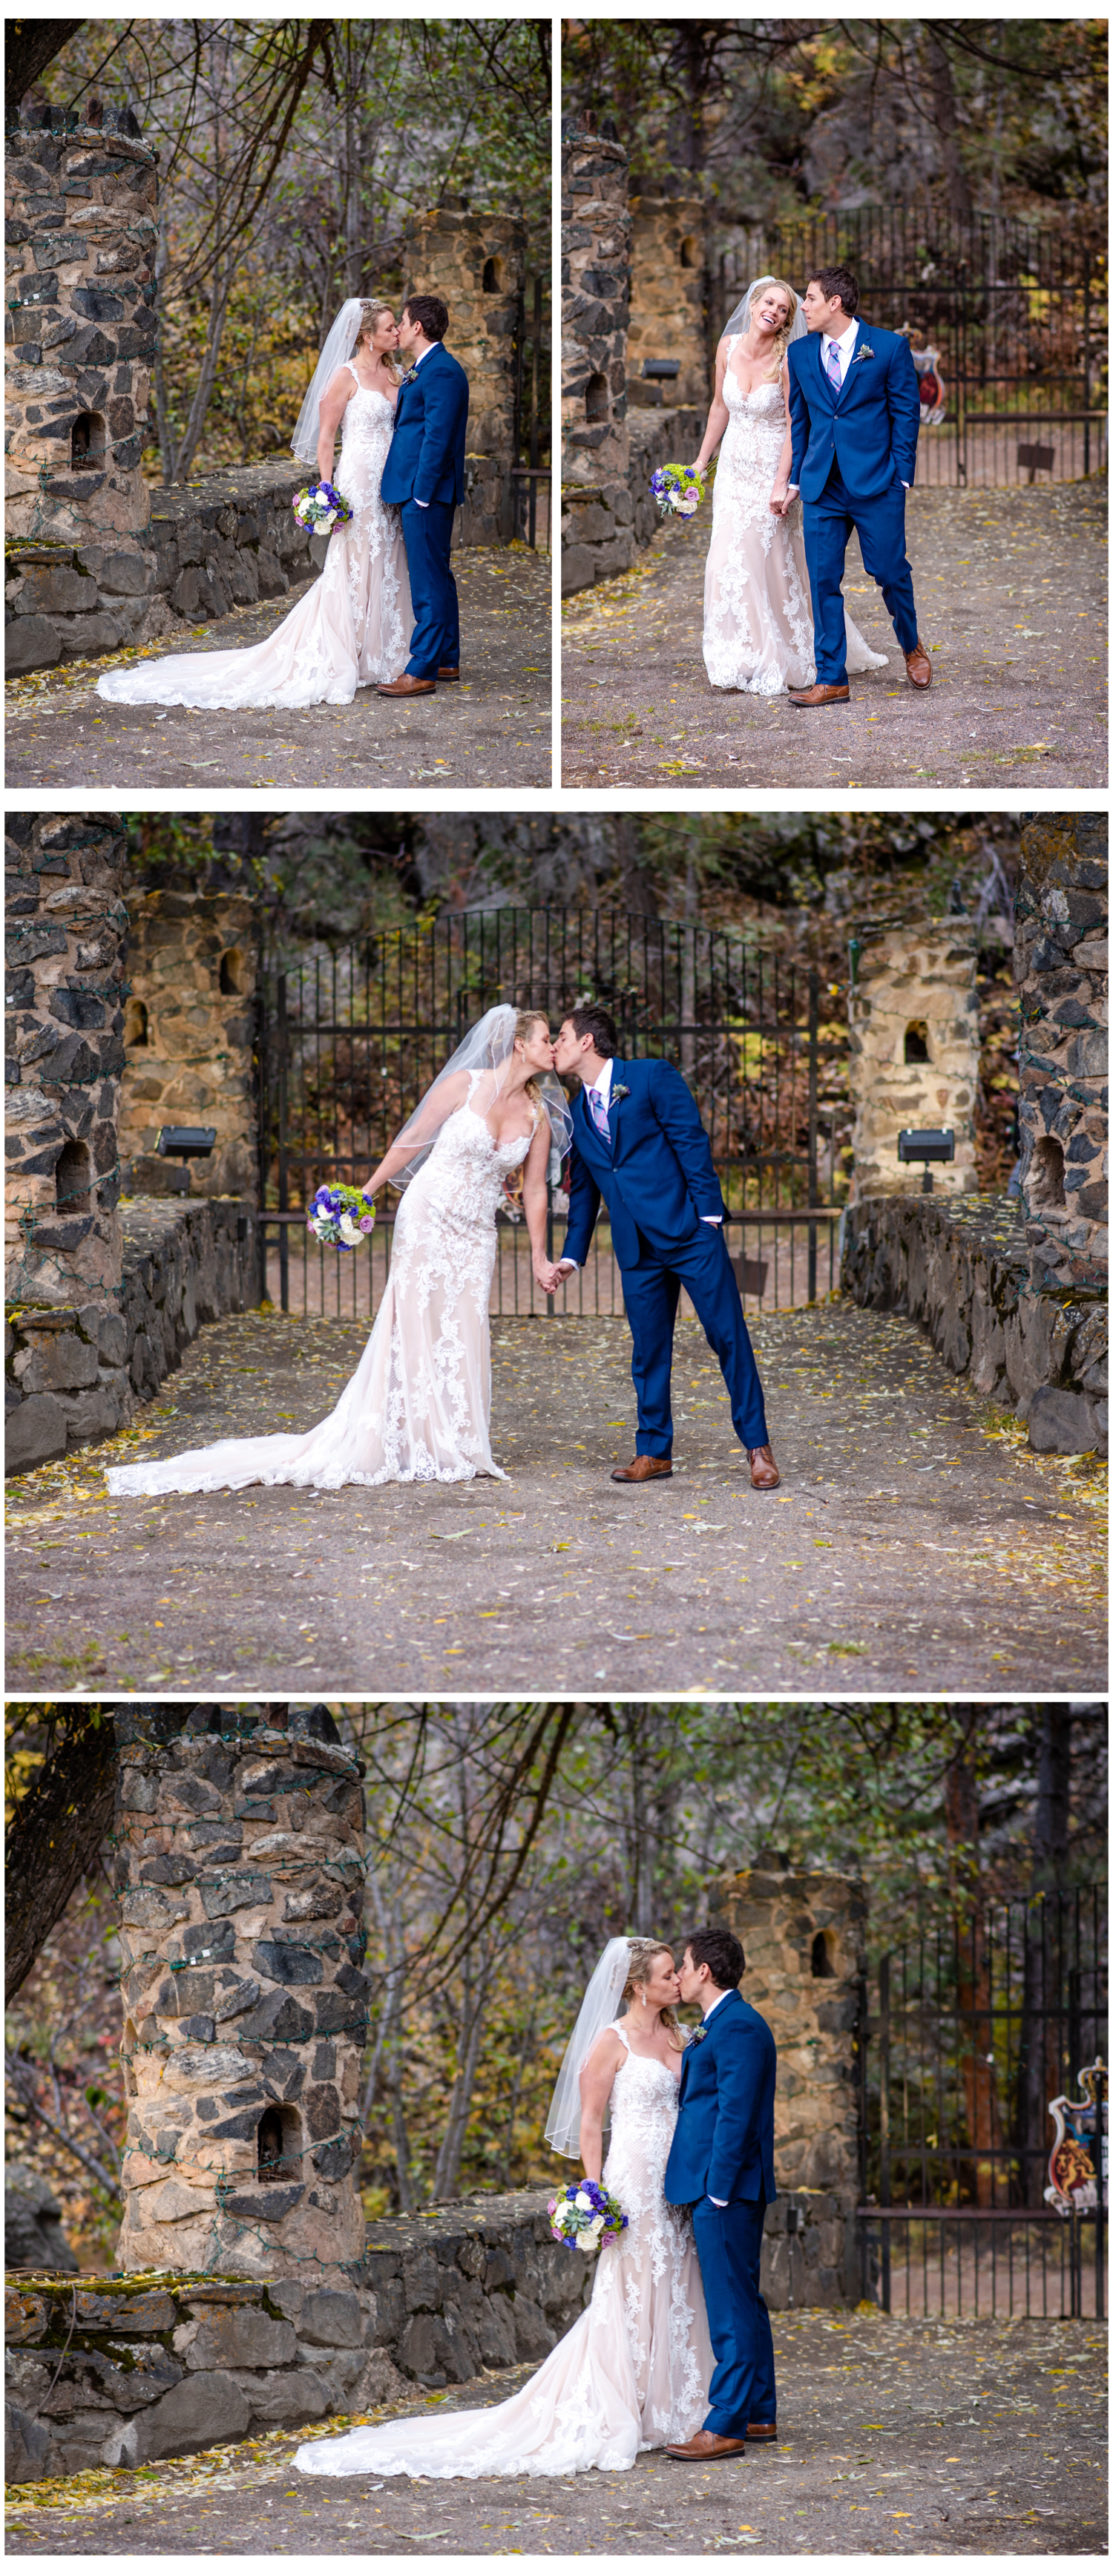 Mandy + Nick Wedding at Dunafon Castle | Britni Girard Photography - Colorado Wedding and Lifestyle Photography - Flowers by Stems A Flower Shop, Dress by Maggie Sottero 